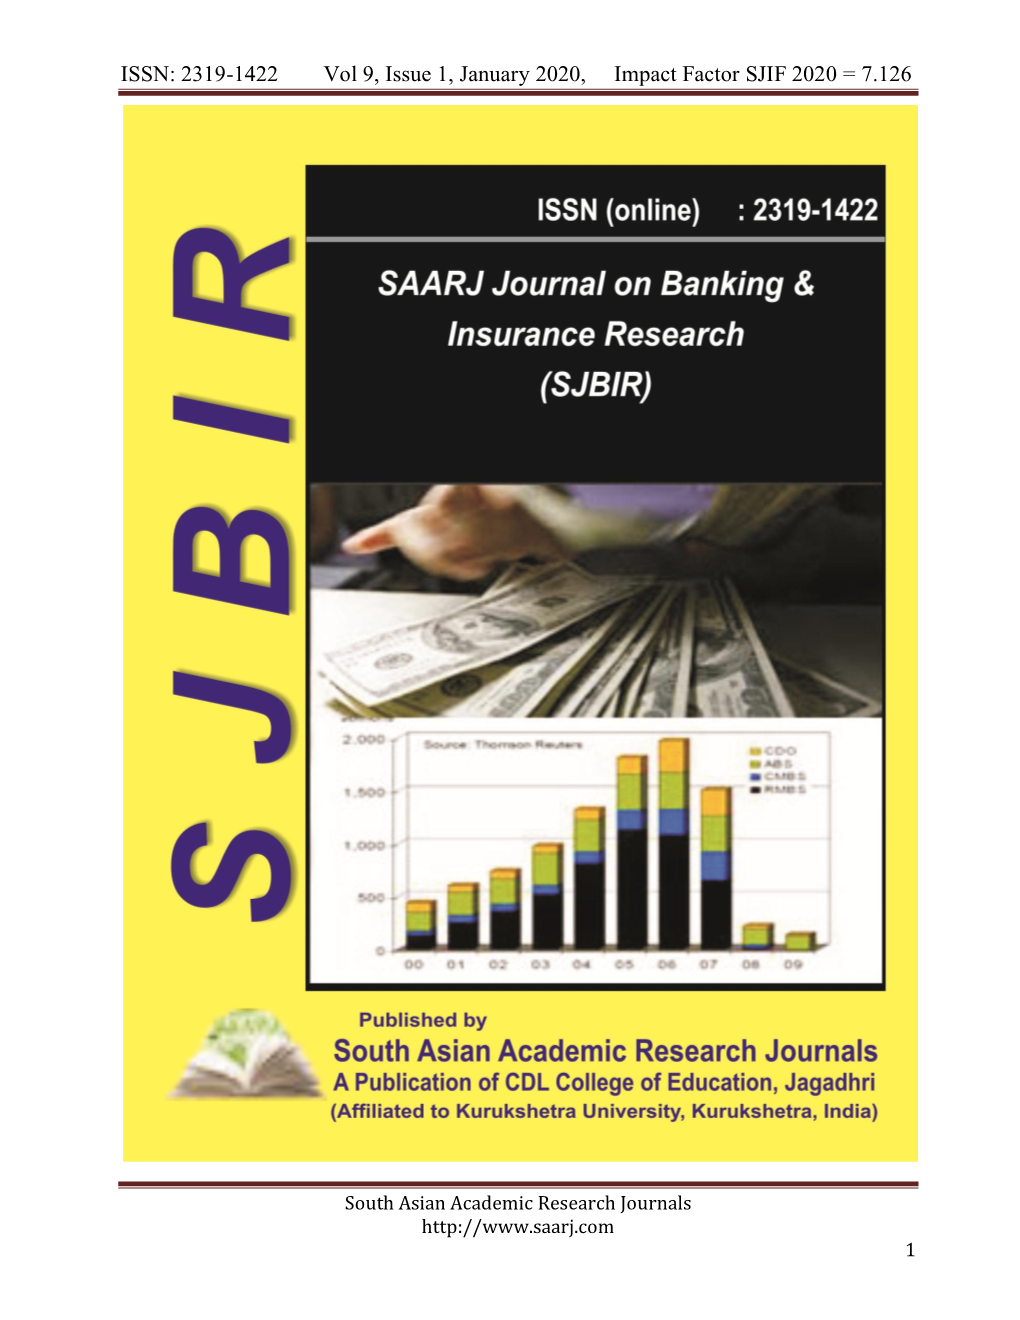 ISSN: 2319-1422 Vol 9, Issue 1, January 2020, Impact Factor SJIF 2020 = 7.126